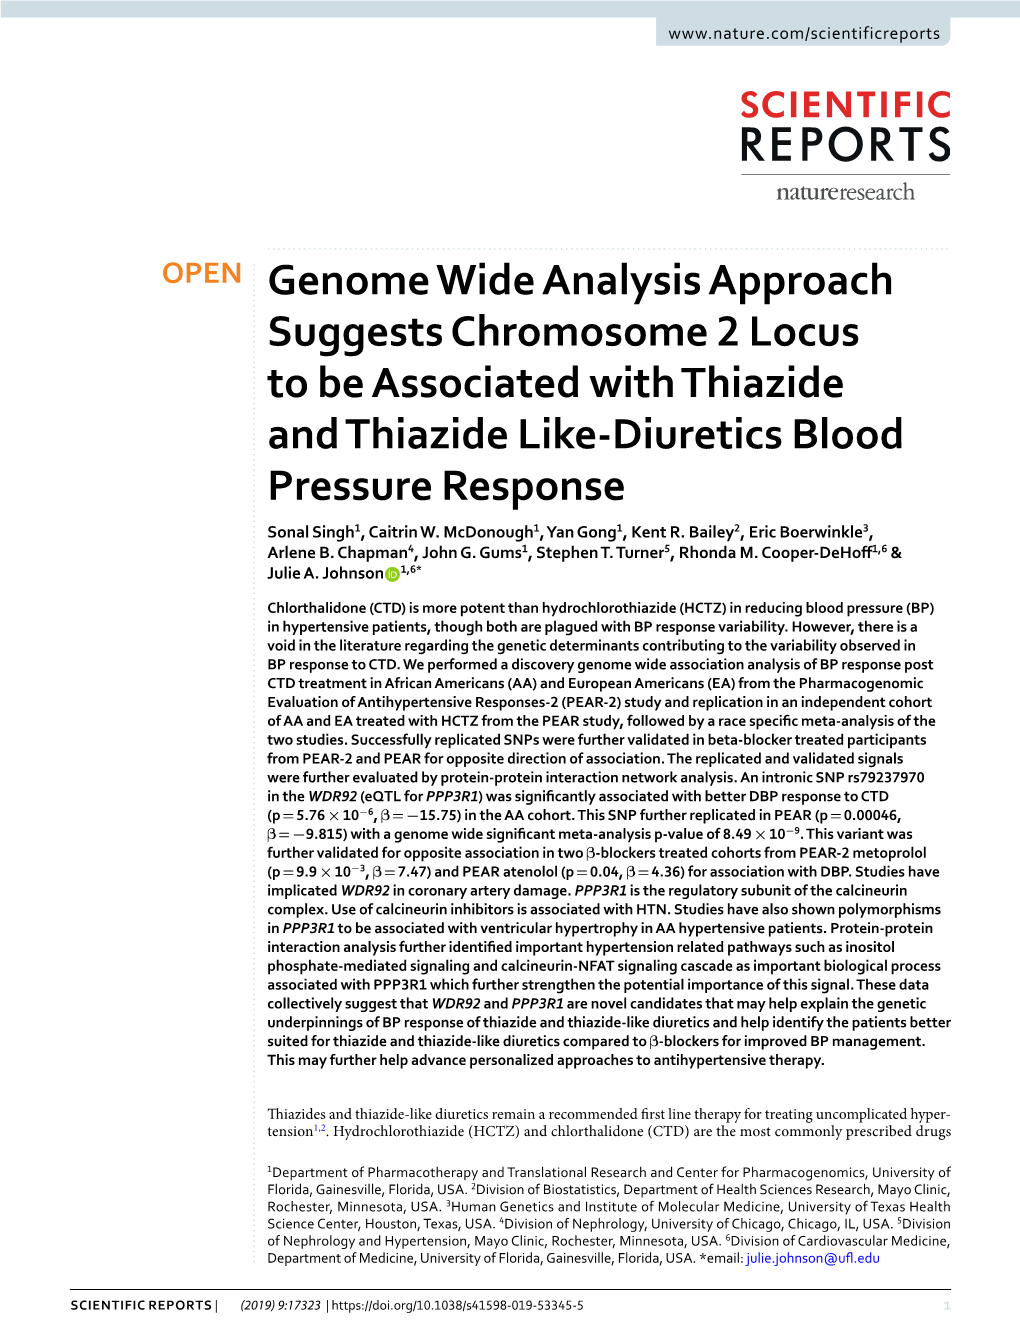 Genome Wide Analysis Approach Suggests Chromosome 2 Locus to Be Associated with Thiazide and Thiazide Like-Diuretics Blood Pressure Response Sonal Singh1, Caitrin W